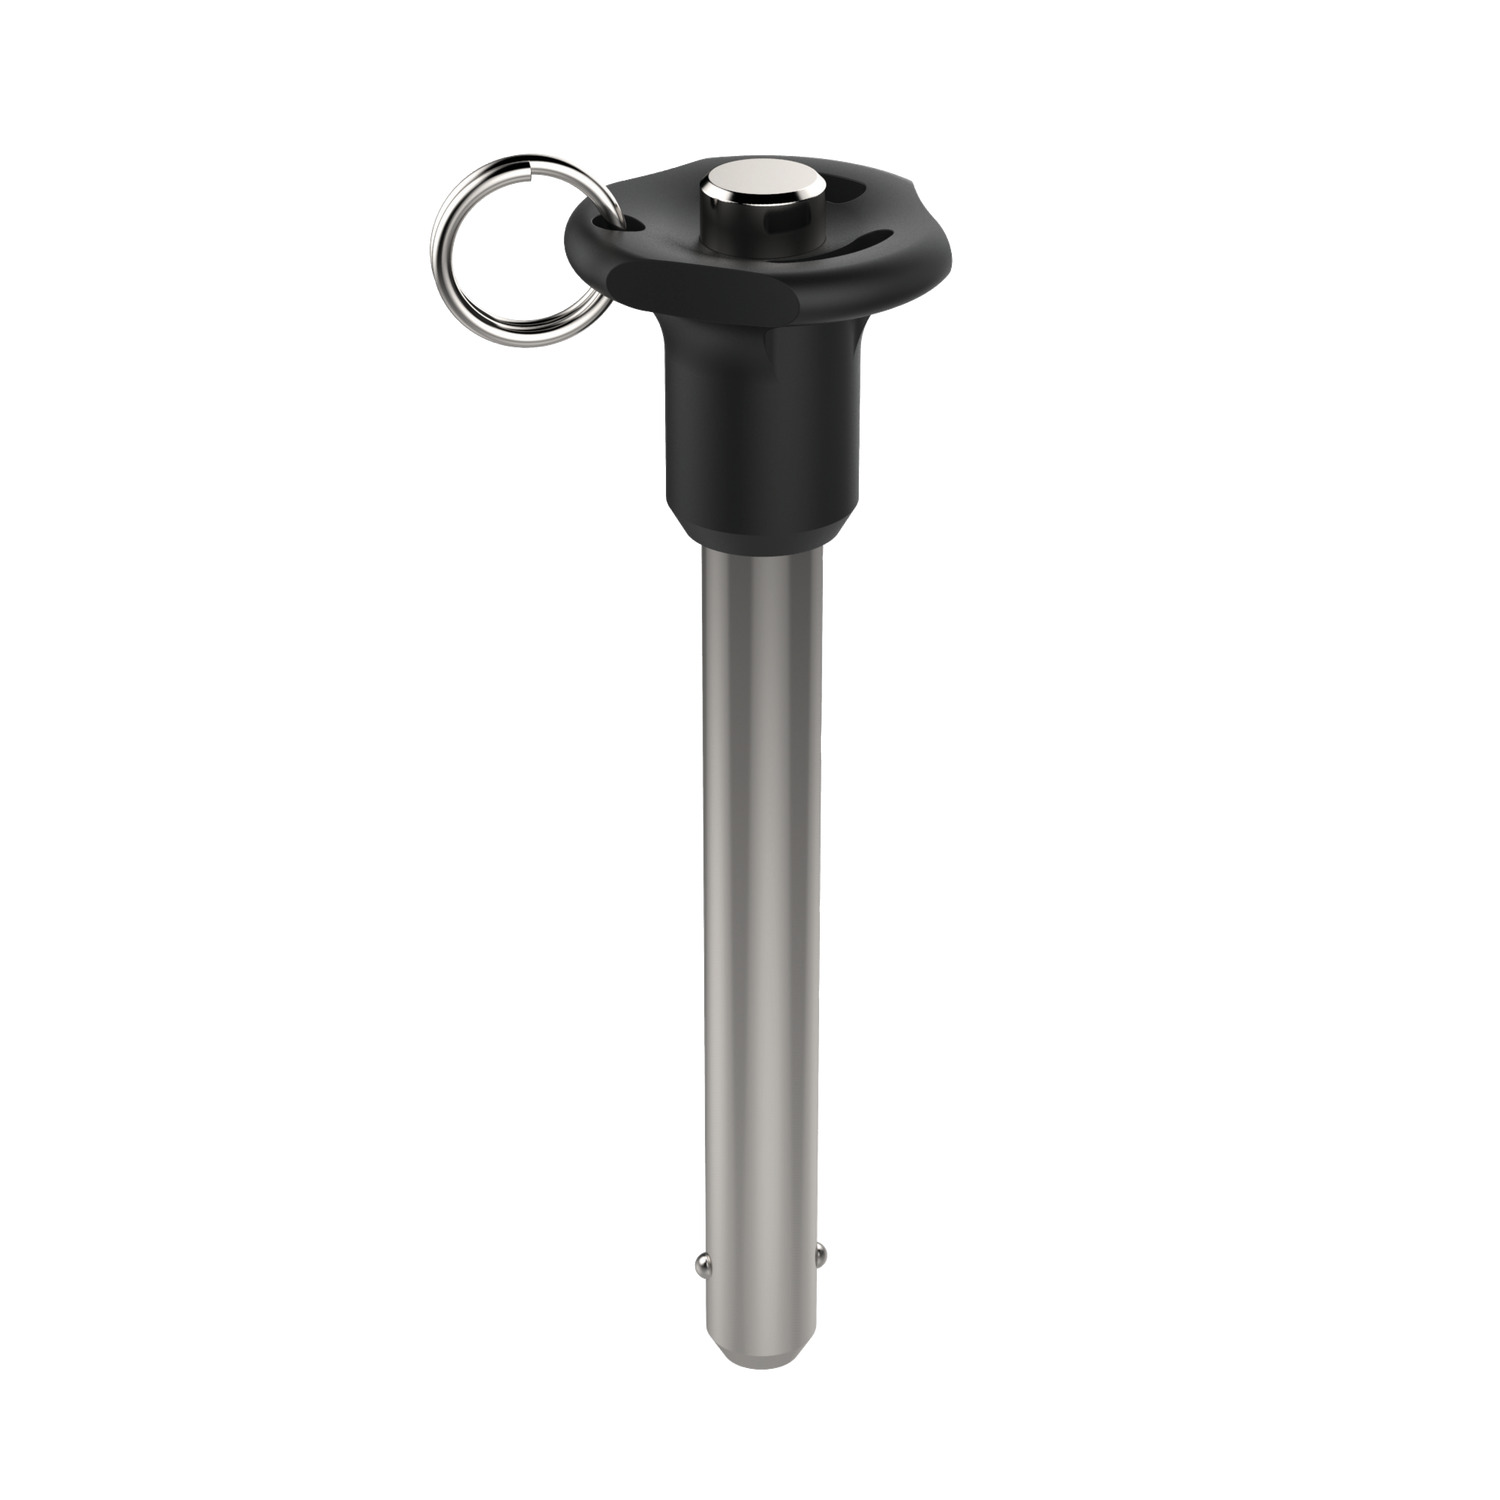 Aviation Pip-Pin - Standard B Handle Aviation ball lock pins, or pip-pins as they are sometimes known, are available from Wixroyd and adhere to NASM/NAS standards. See more about our aviation pins here.